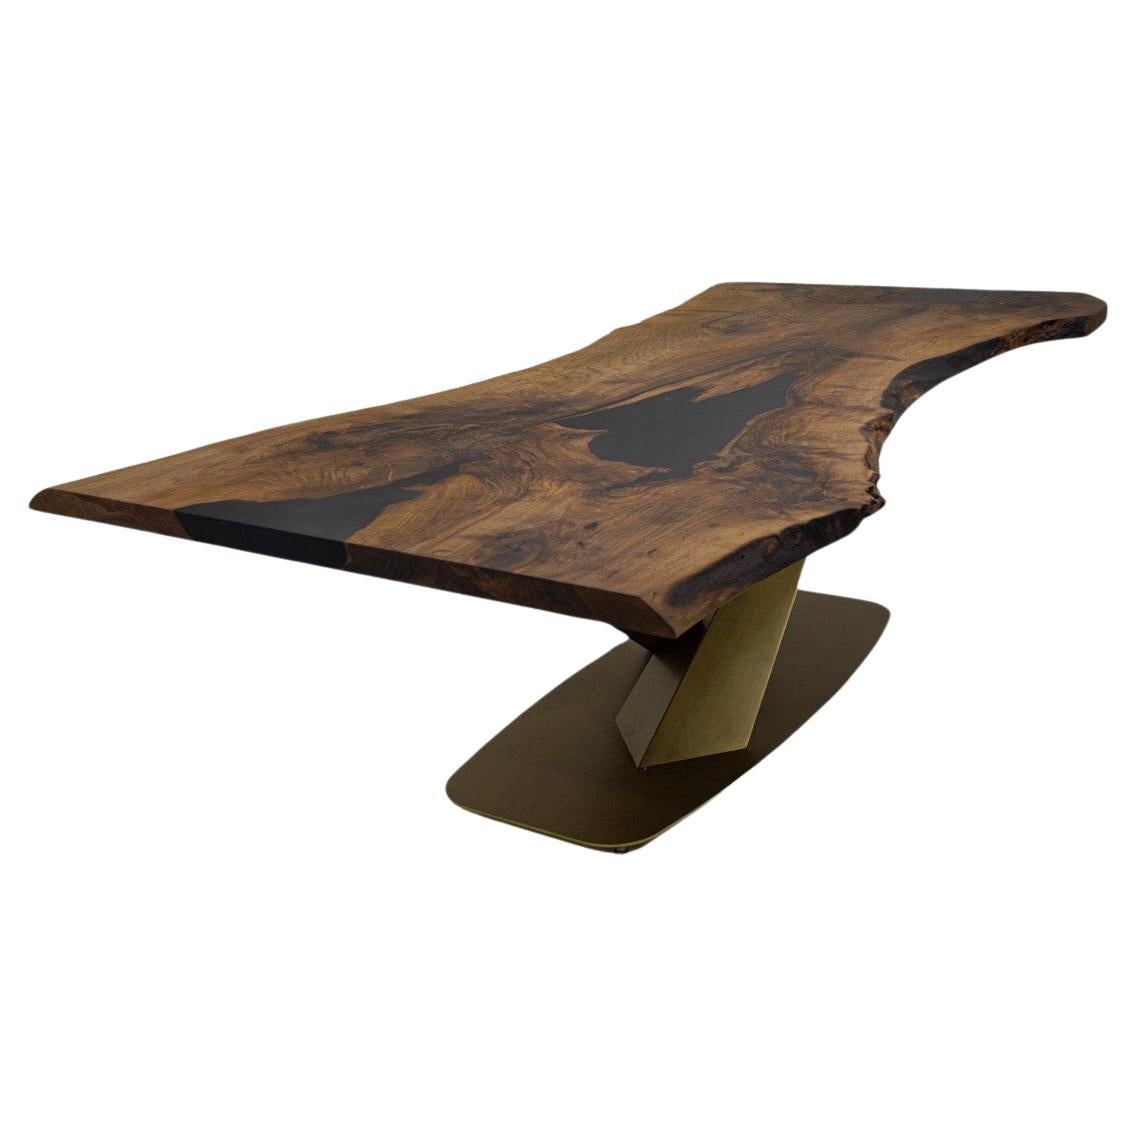 One Piece (Single Slab) Walnut Table

Some Walnut slabs have a lot of natural beauty as it’s one side has a large curve. This is one of them! 

We've filled the cracks with black epoxy., without disrupting naturalness of the slab!

If you'd like to